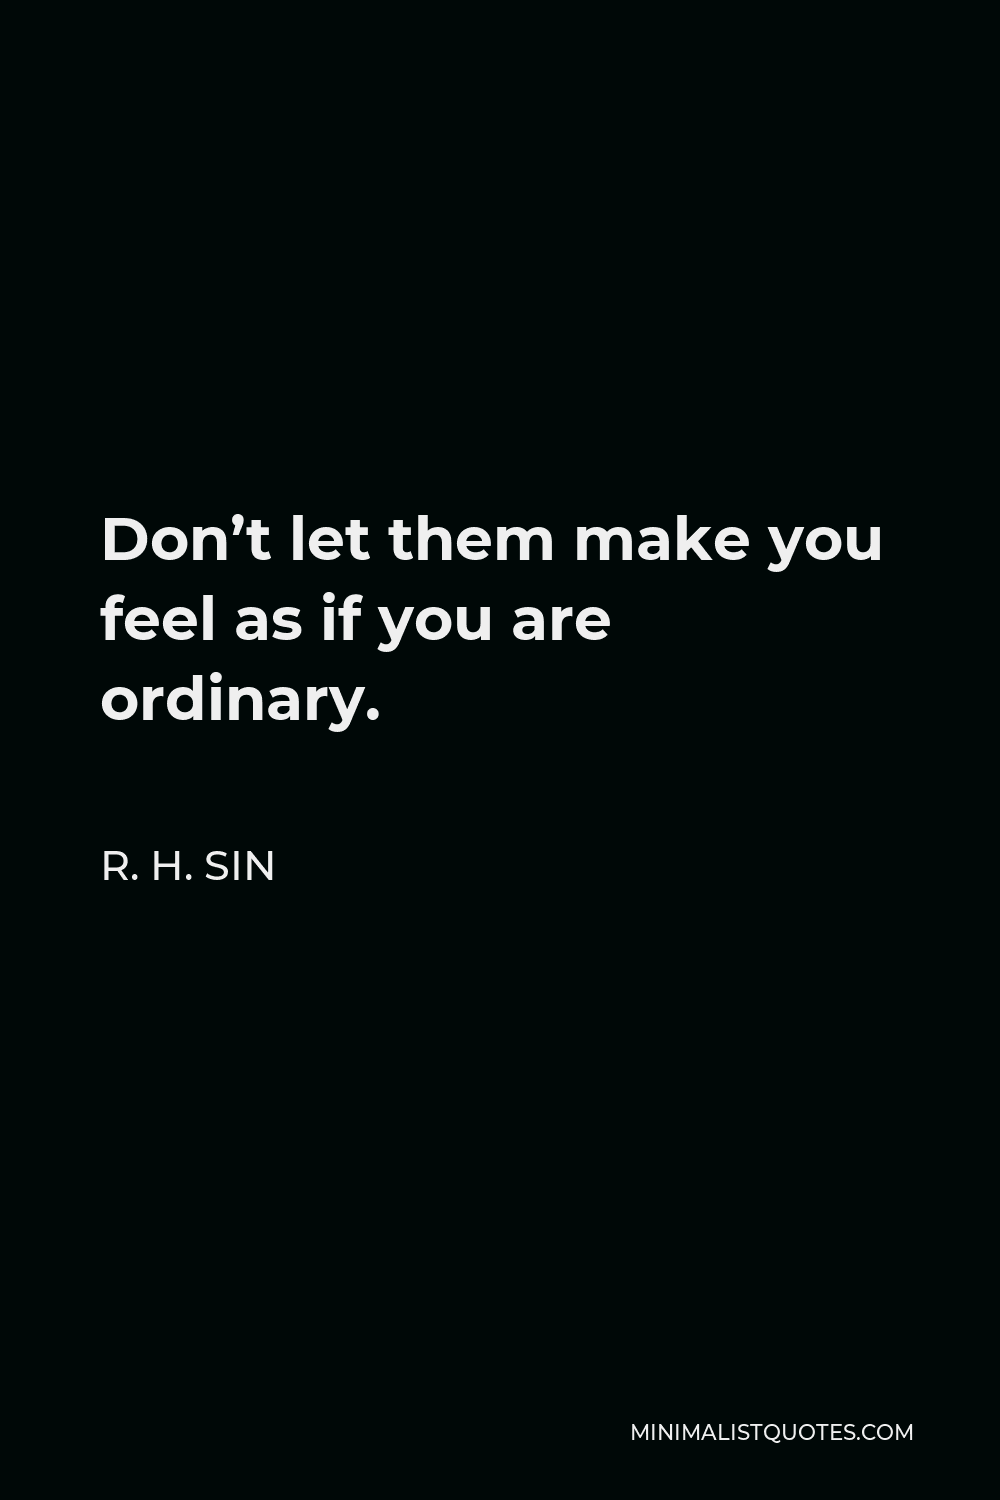 R. H. Sin Quote - Don’t let them make you feel as if you are ordinary.